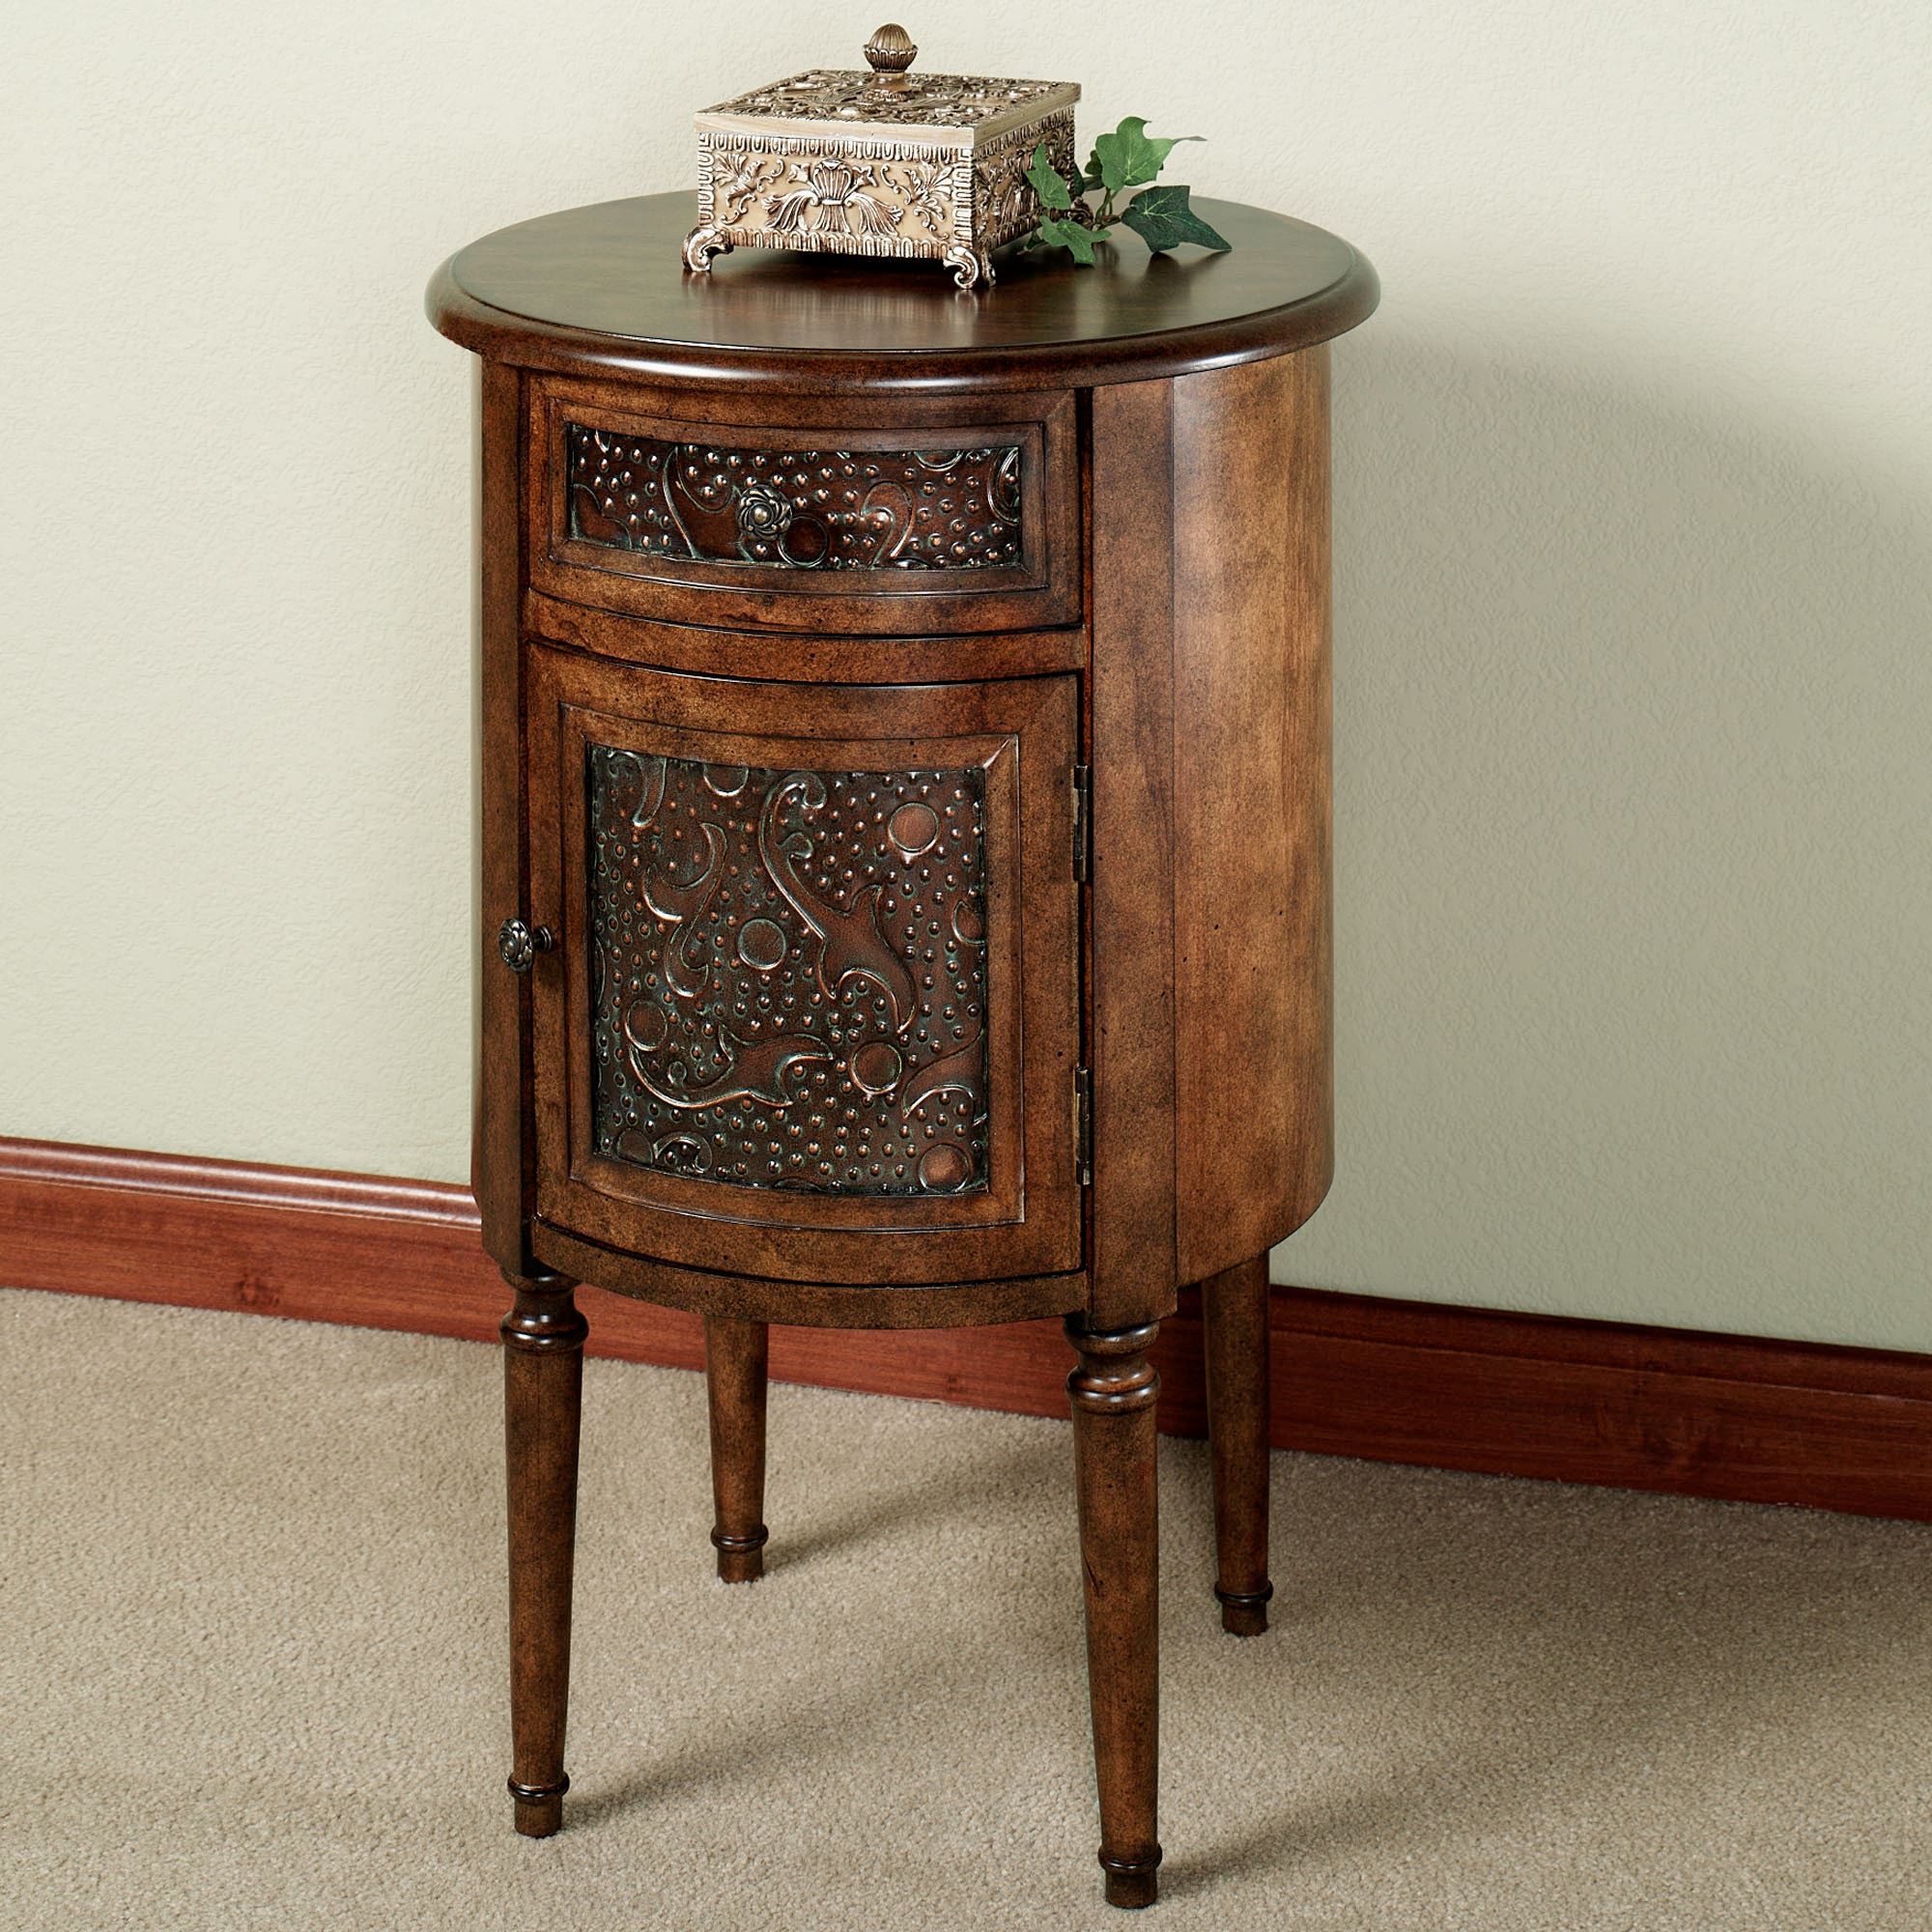 lombardy round storage accent table english walnut touch zoom verizon tablet small black side foyer furniture pieces wide bedside cabinets kids bedroom sets mirror night ikea